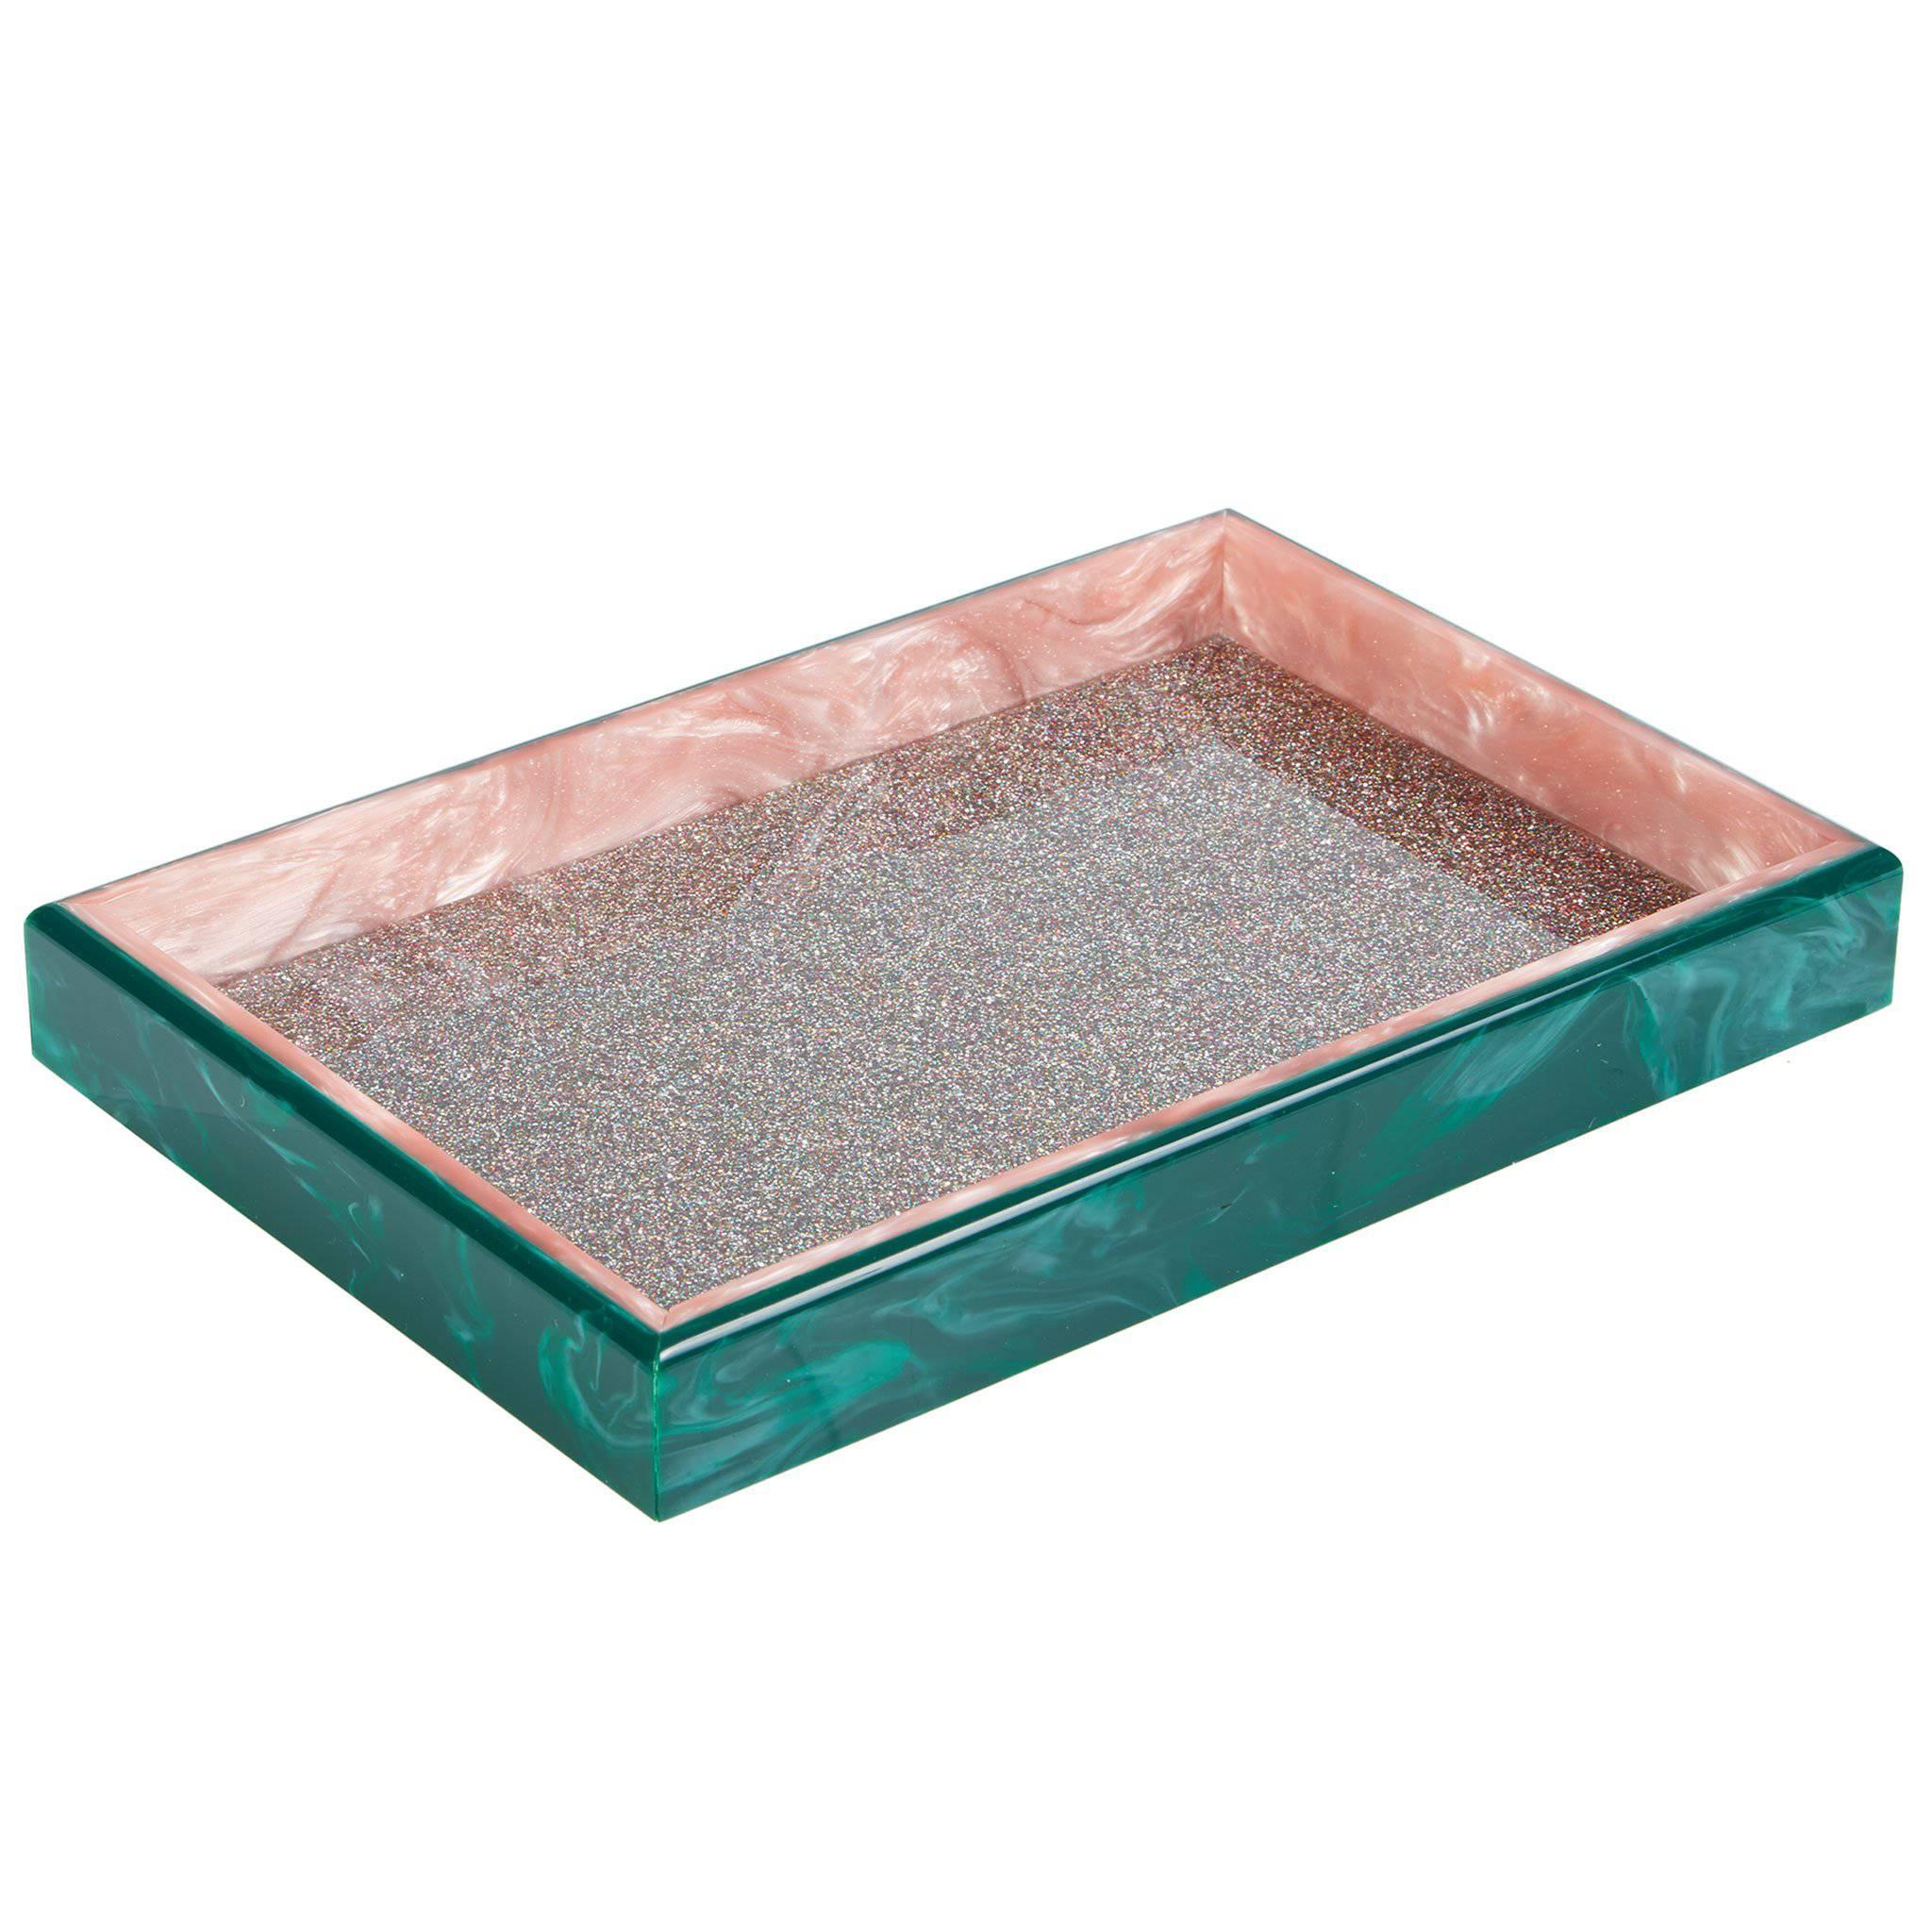 Edie Parker Home Vanity Tray Solid in Rainbow Glitter and Malachite Acrylic For Sale